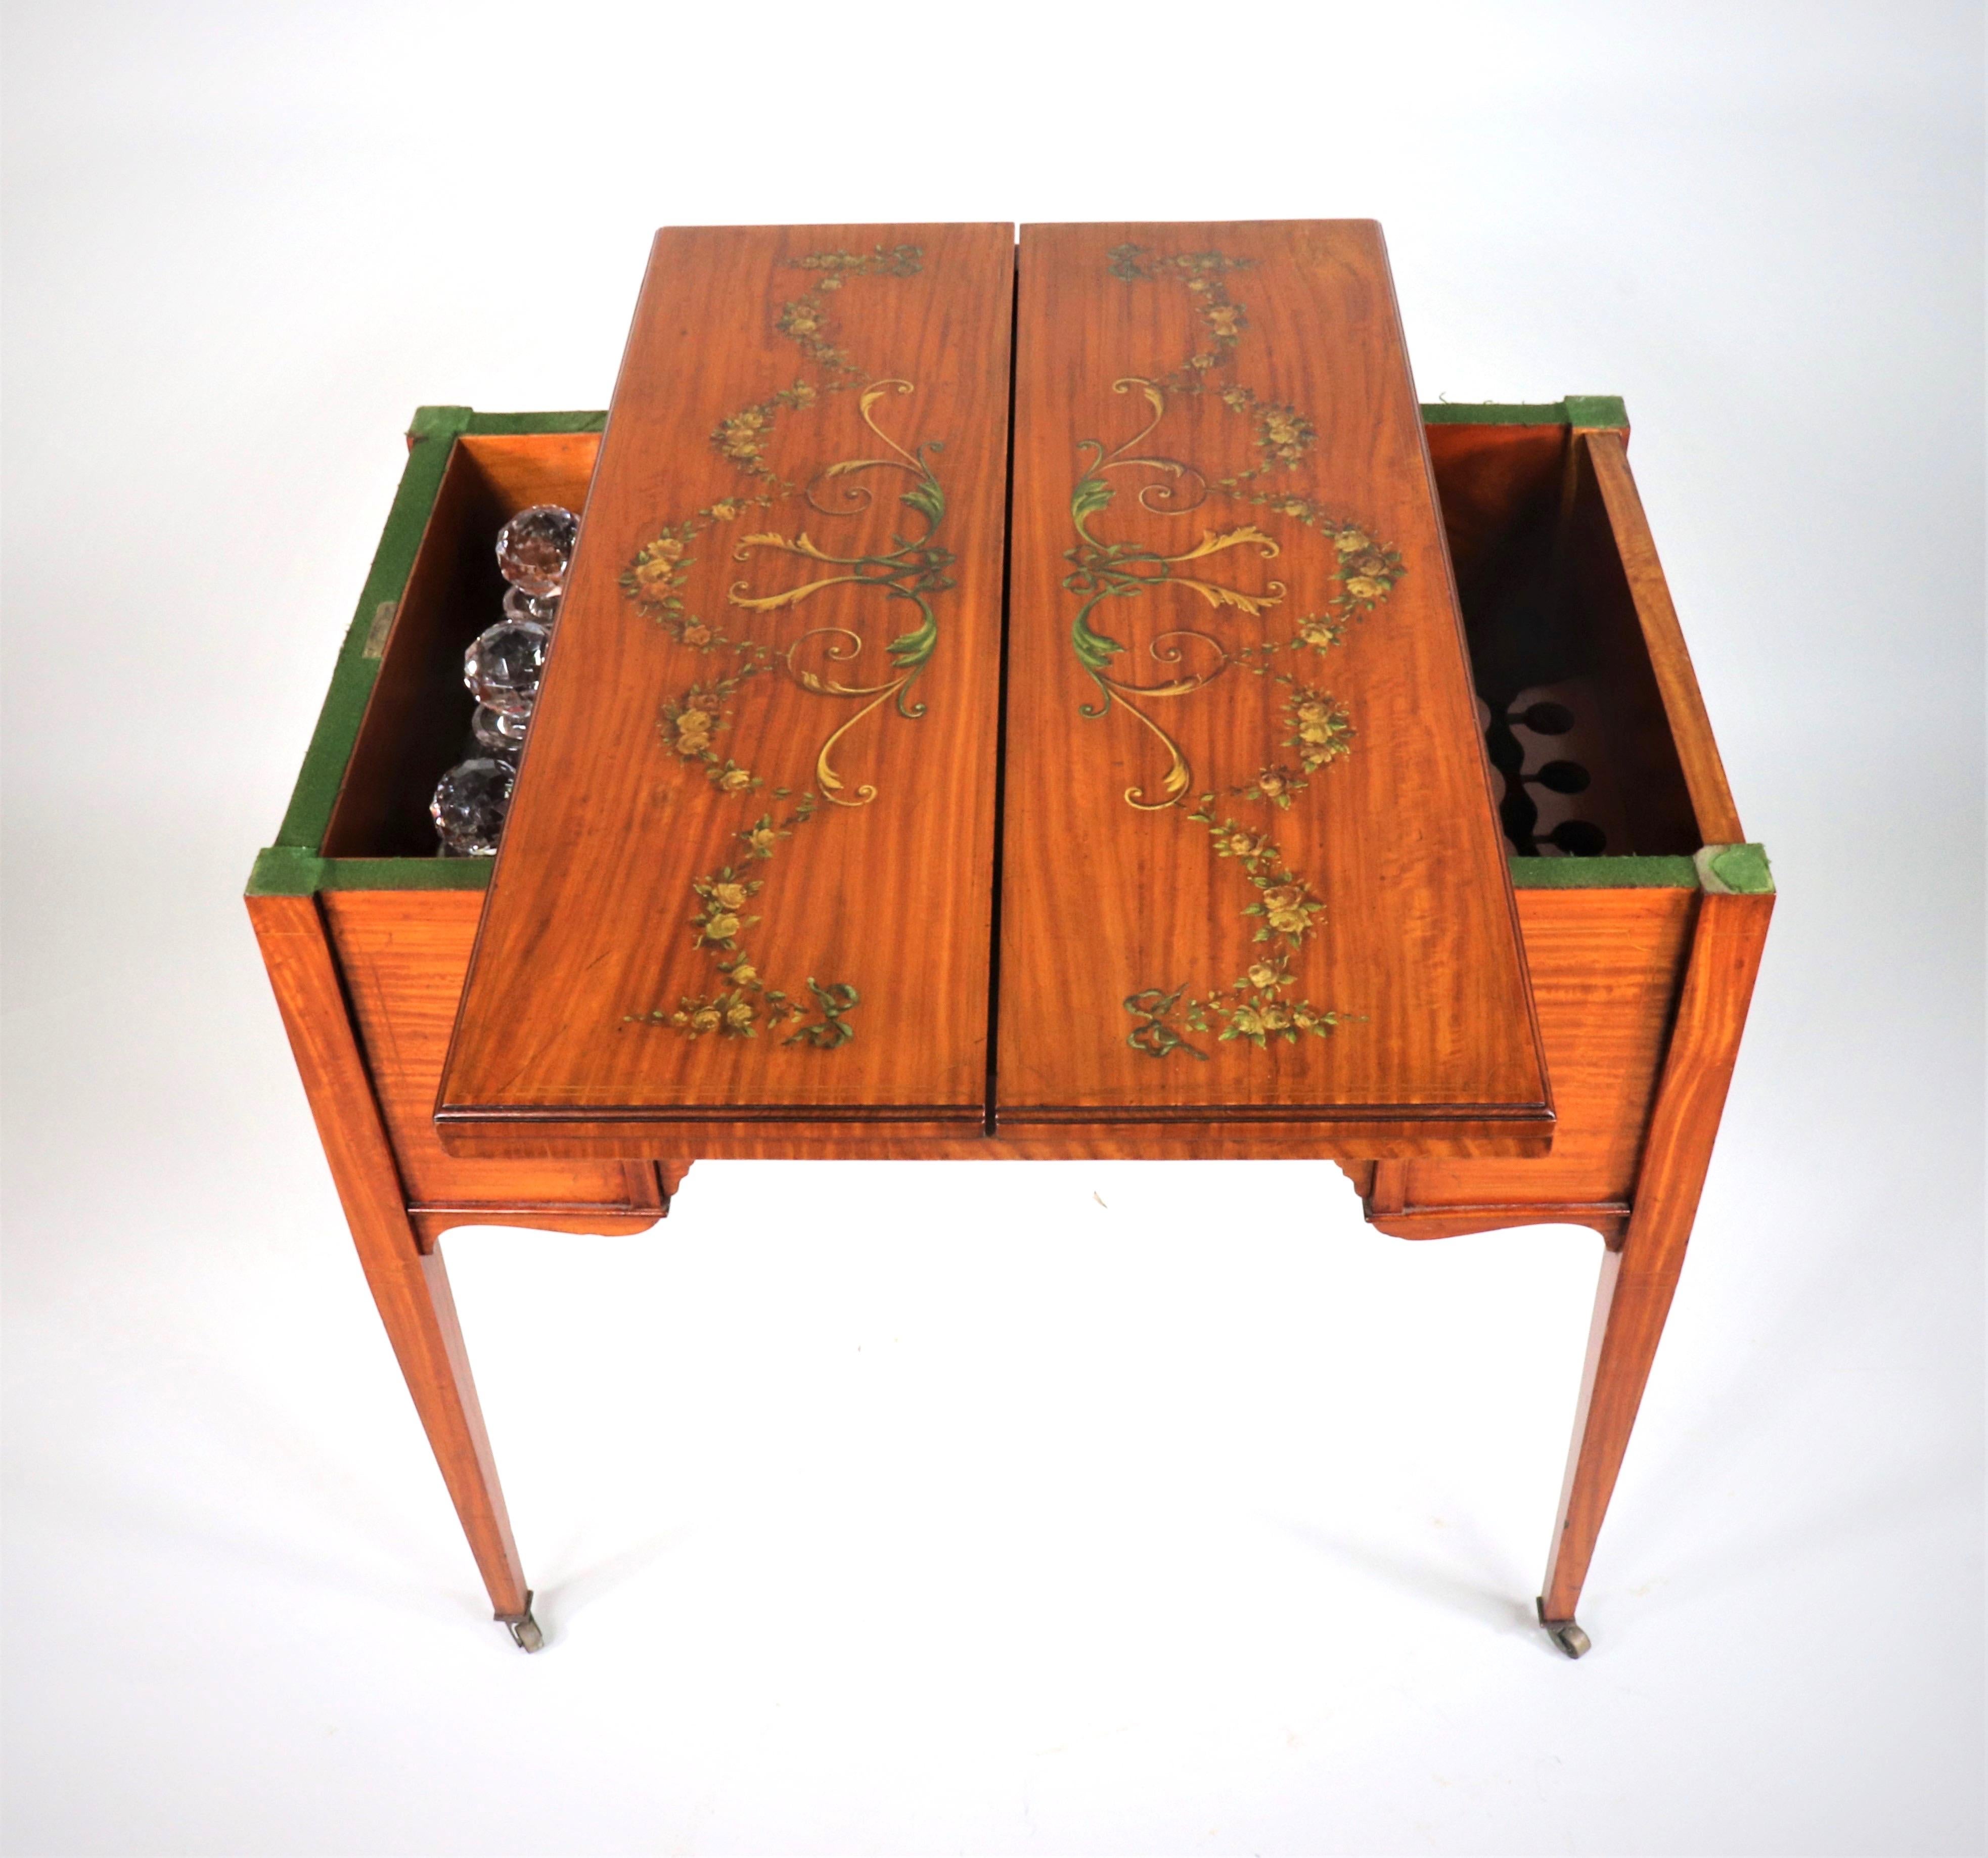 Hand-Carved Edwardian Satinwood Hand-Painted Metamorphic Game Table For Sale